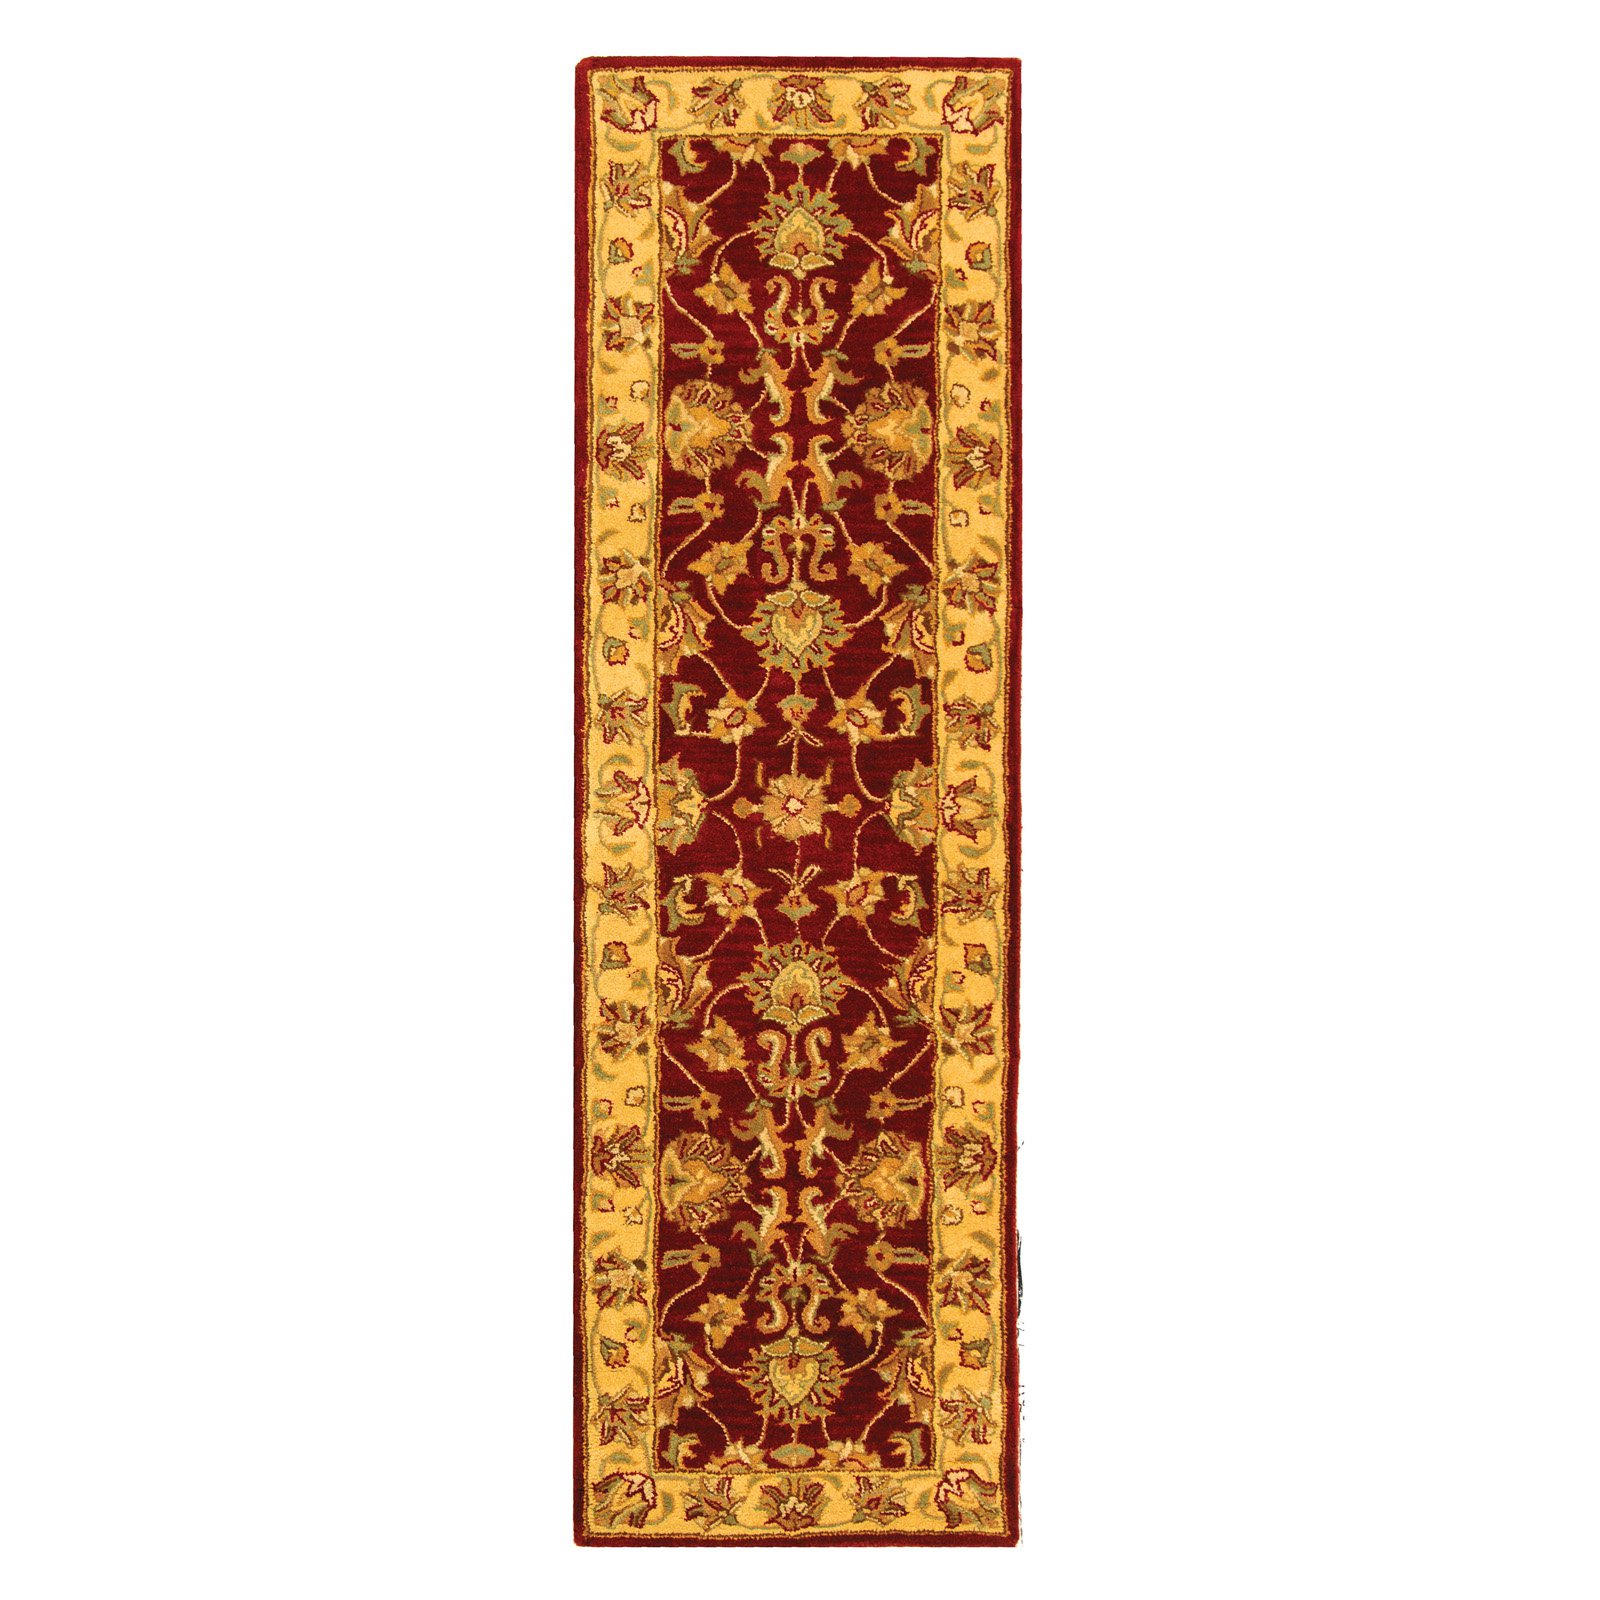 SAFAVIEH Heritage Regis Traditional Wool Area Rug, Red/Gold, 2'3" x 4' - image 3 of 9